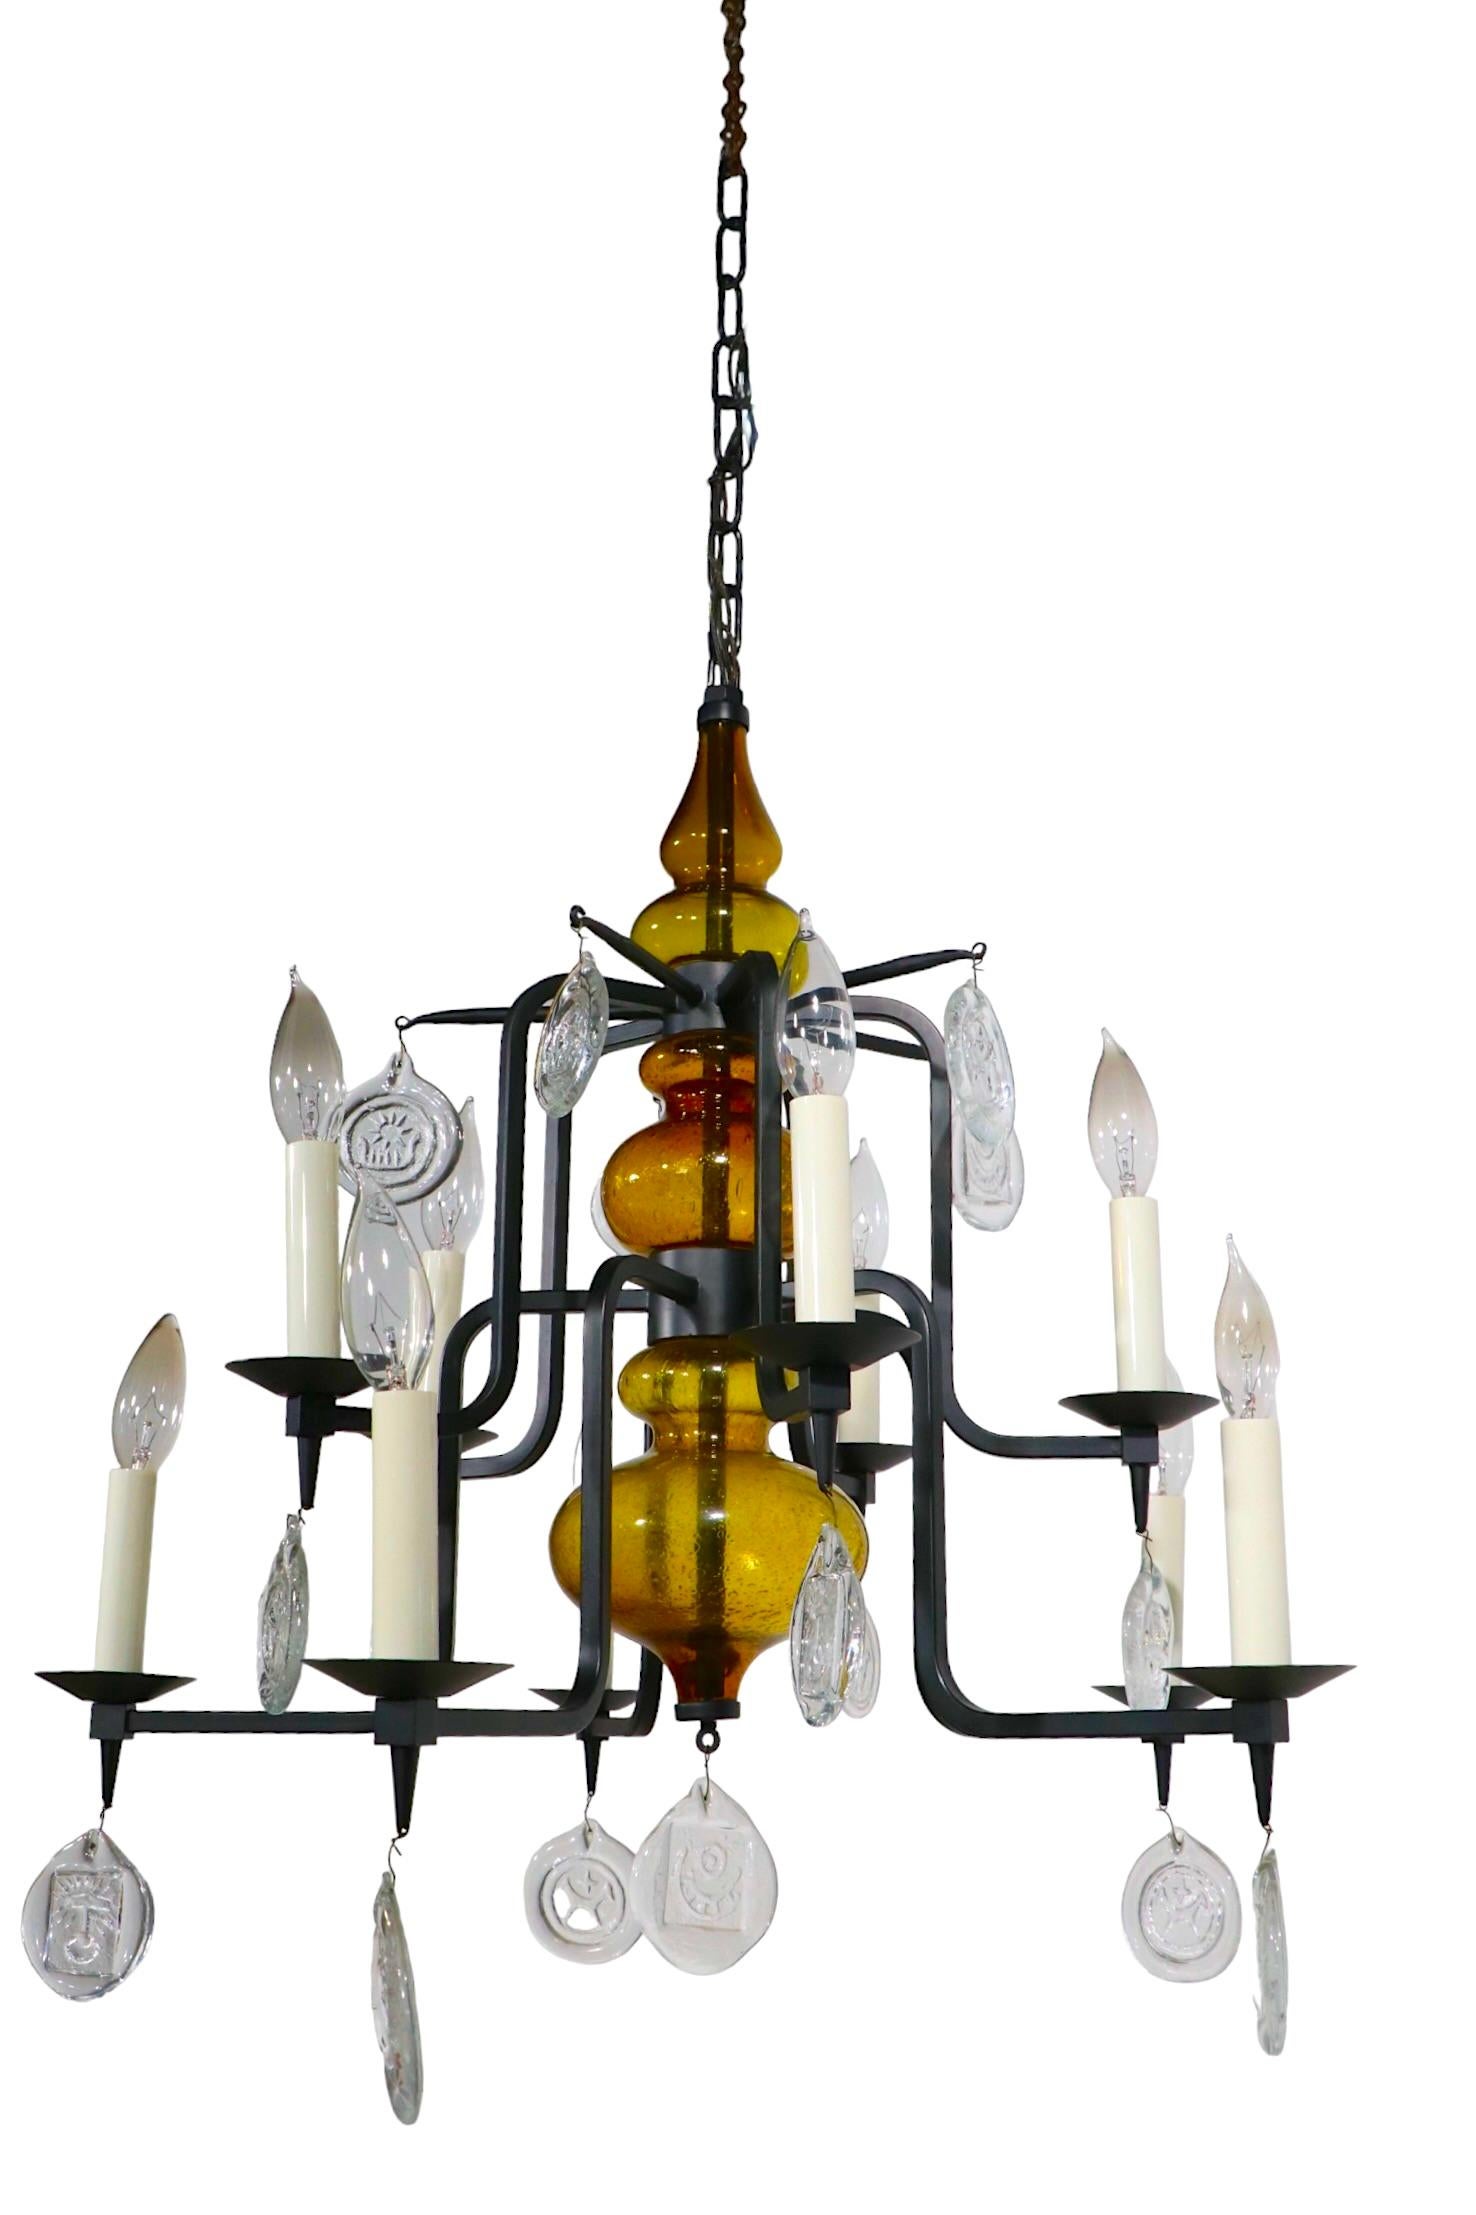 Exceptional Danish Mid Century Modern chandelier by Erik Hoglund for Body Nova, Made in Denmark circa 1950's. The fixture features two tiers each having 5 electrified  candle sconce arms, a wrought iron frame, with a  blown amber glass body, and the